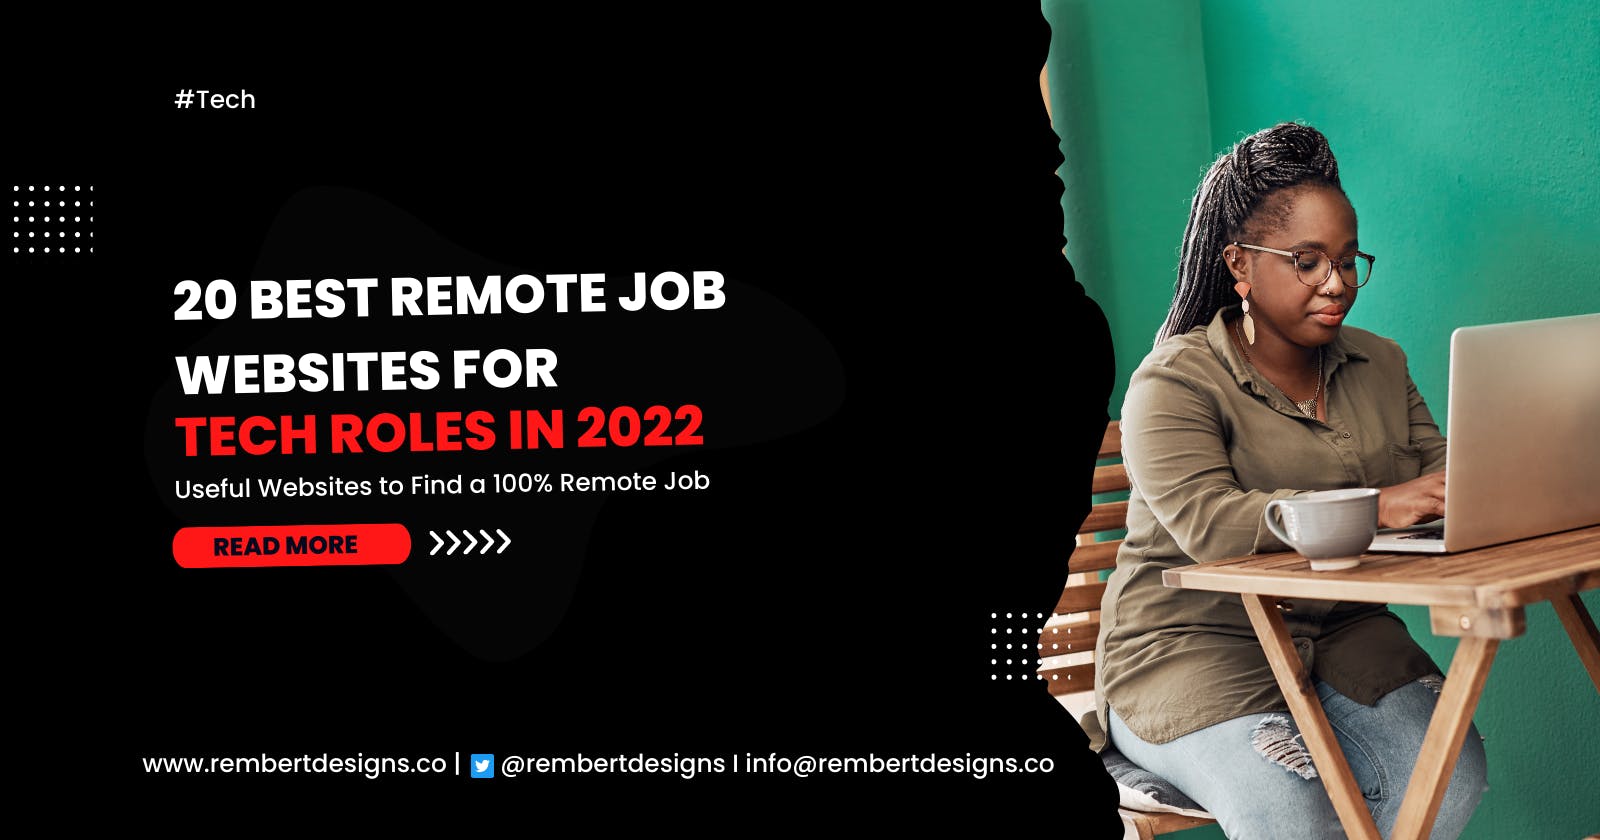 20 Best Remote Job Websites For Tech Roles in 2022